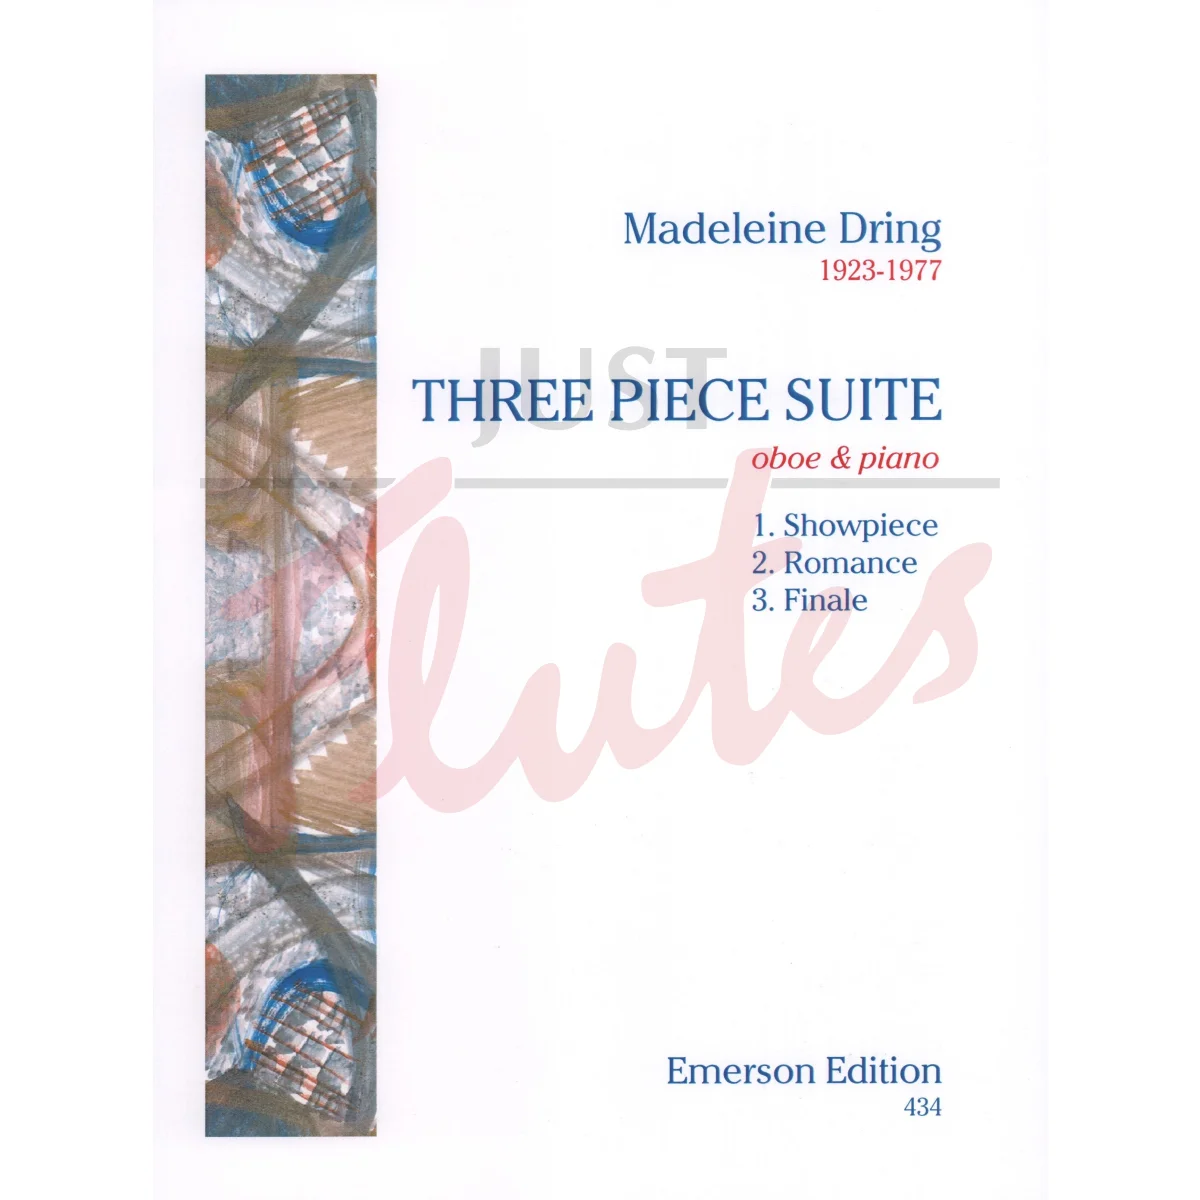 Three Piece Suite for Oboe and Piano